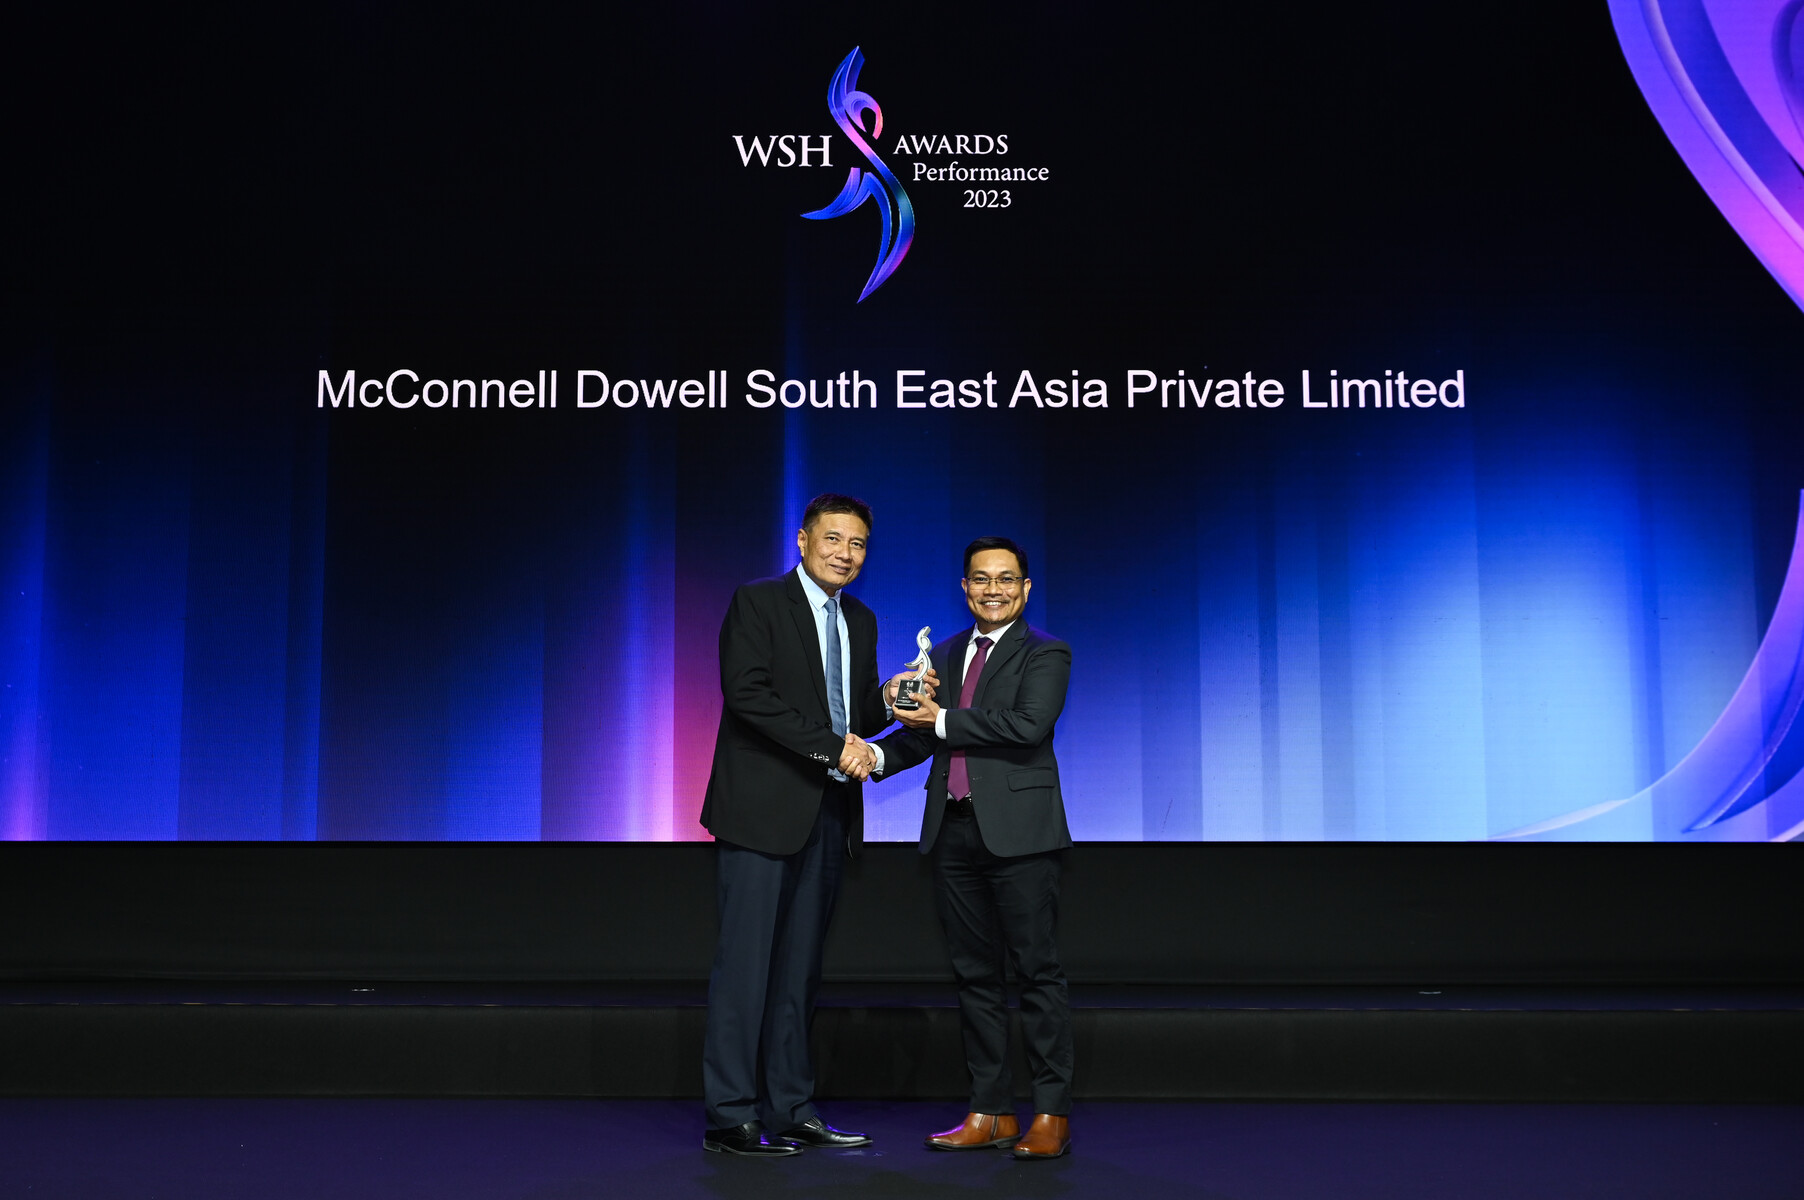 McConnell_Dowell_South_East_Asia_Private_Limited.jpg